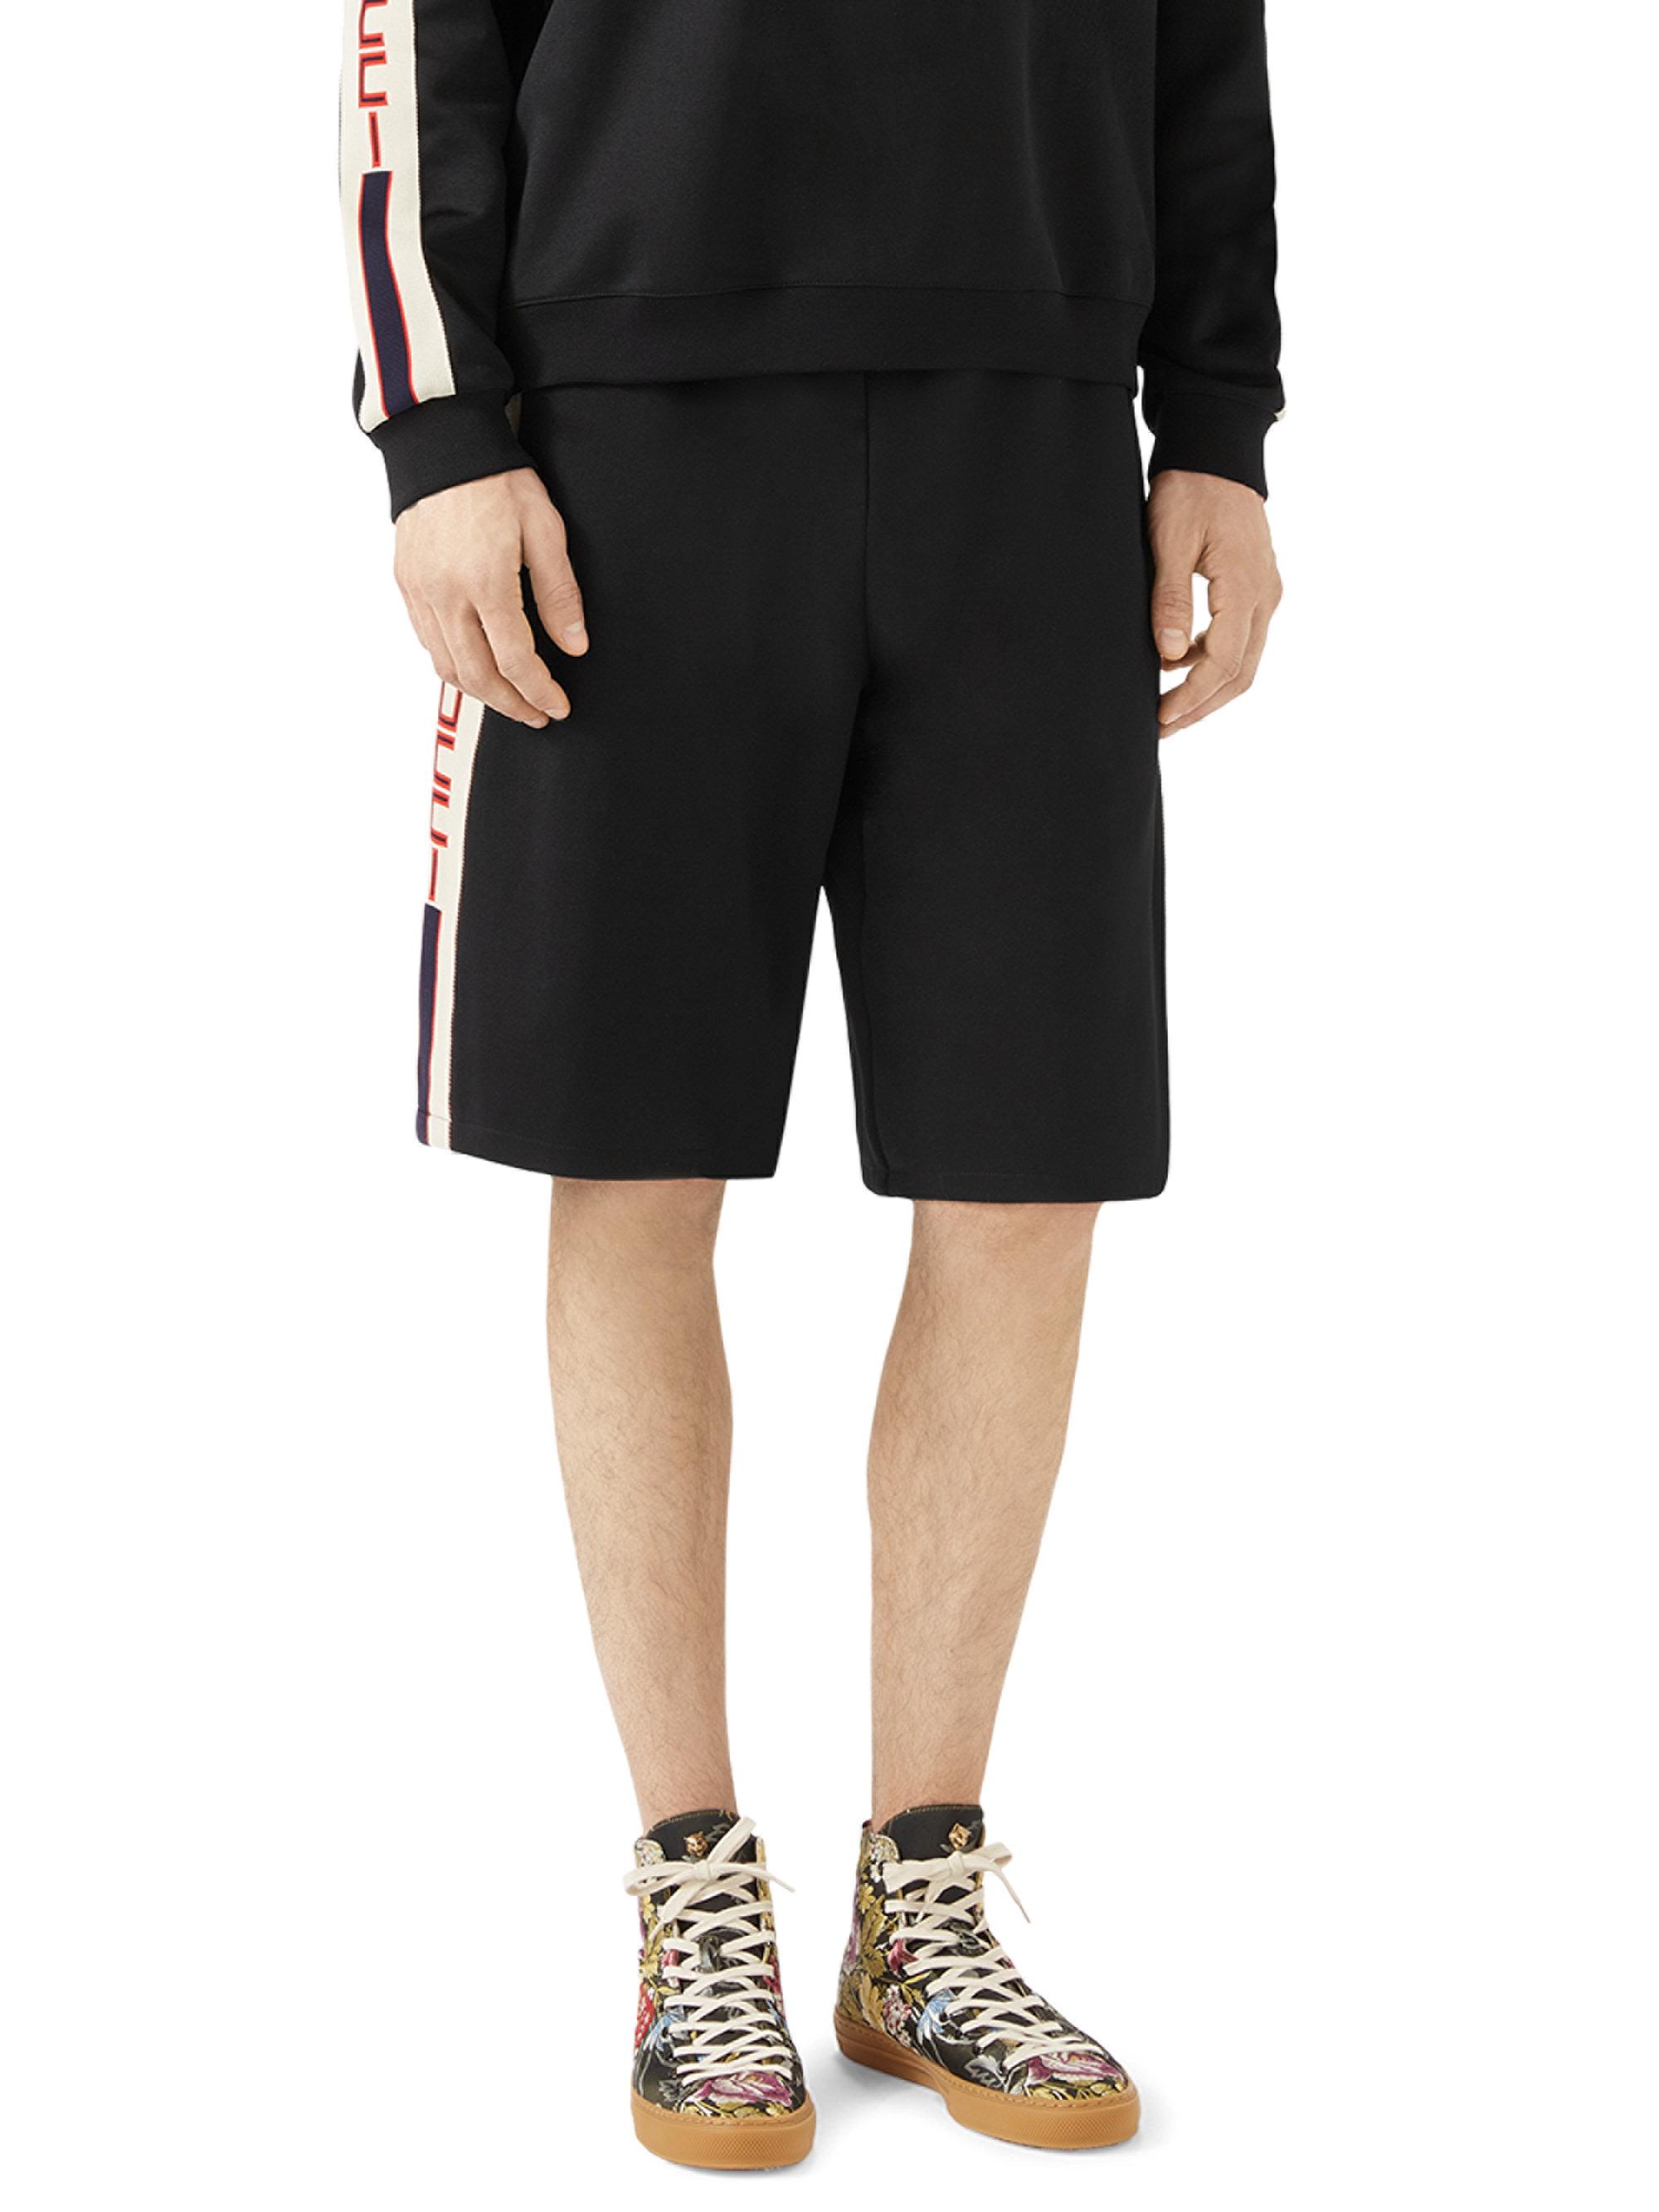 Gucci Technical Jersey Shorts in Black for Men - Lyst